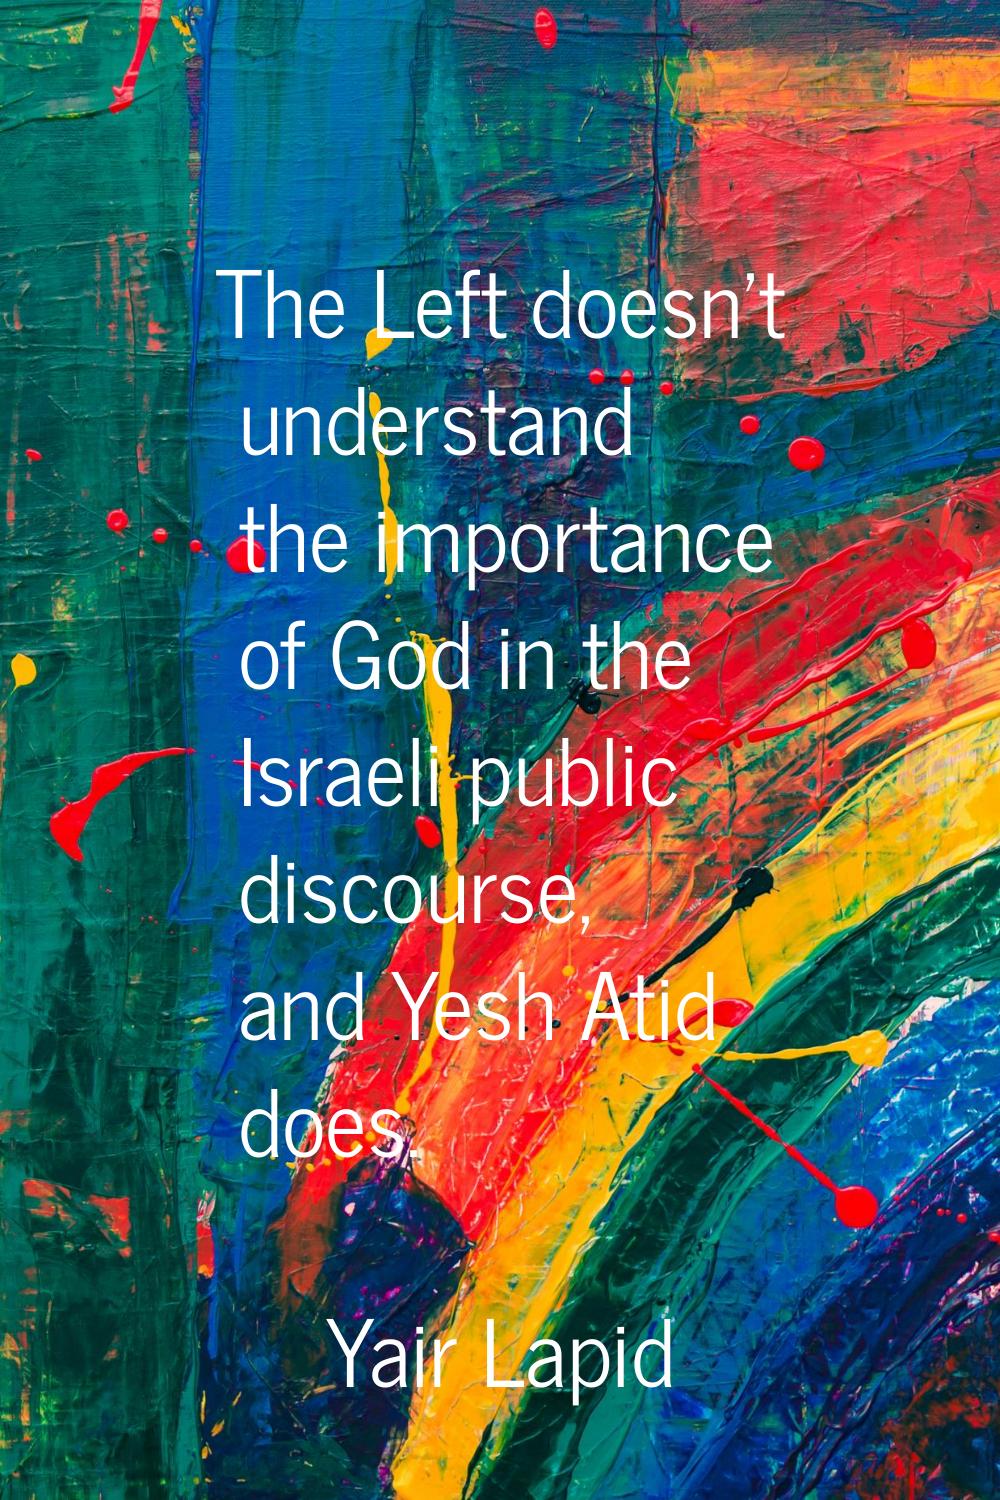 The Left doesn't understand the importance of God in the Israeli public discourse, and Yesh Atid do